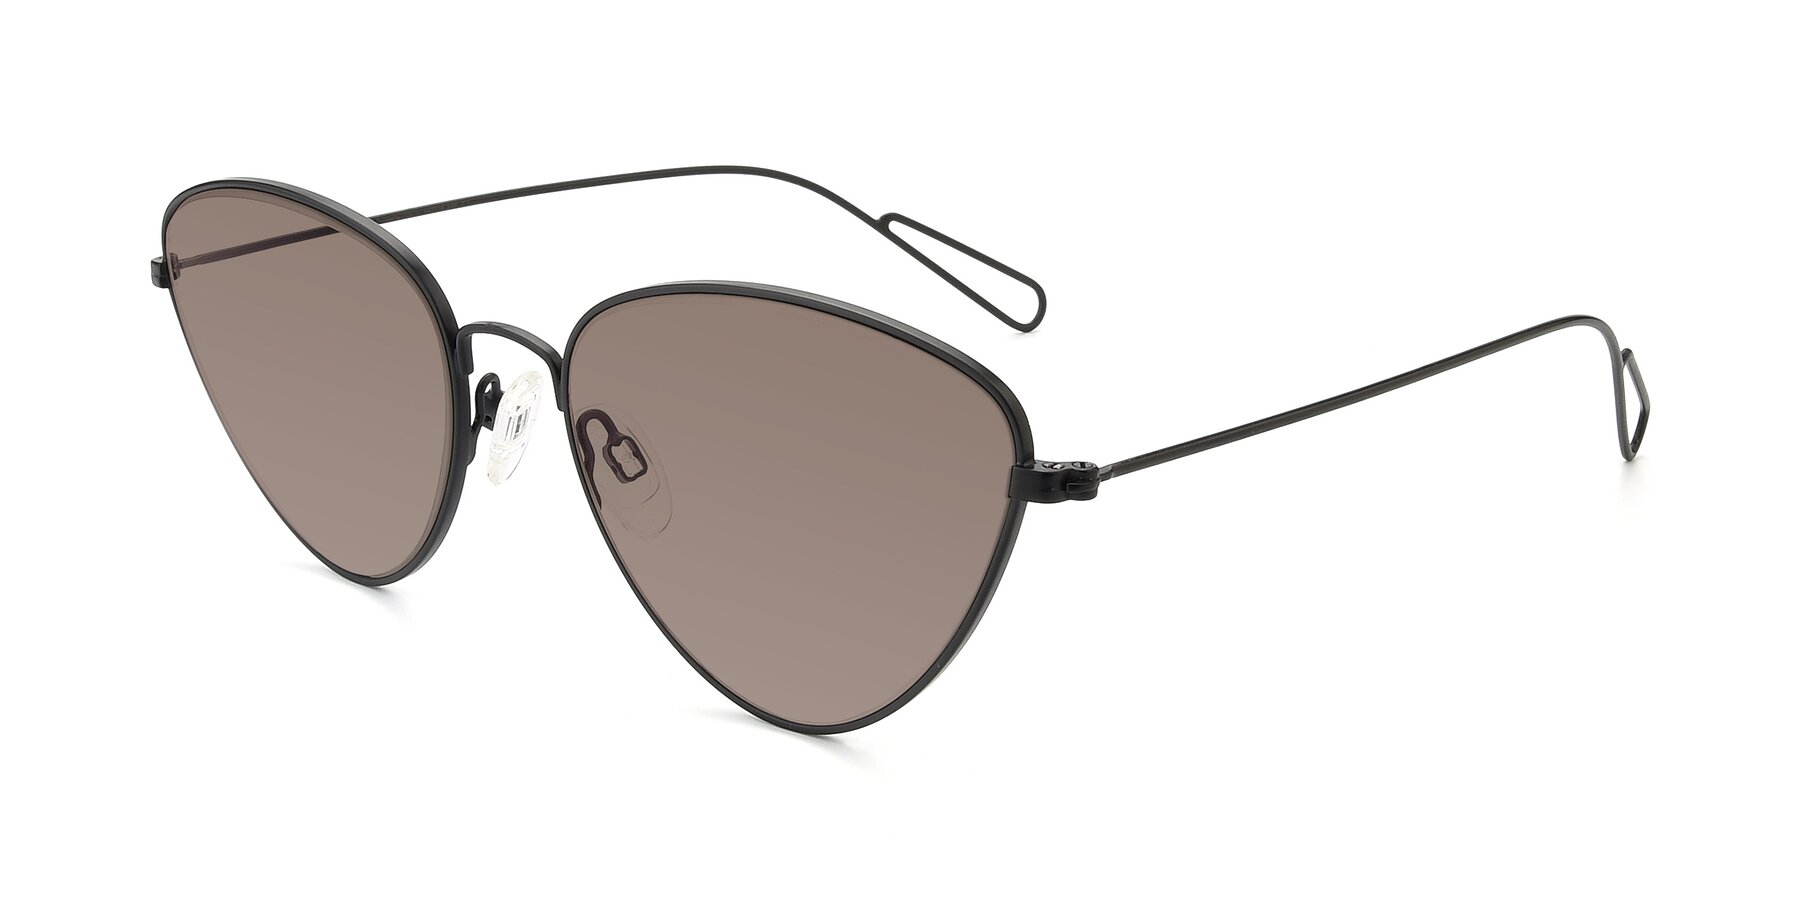 Angle of Butterfly Effect in Black with Medium Brown Tinted Lenses